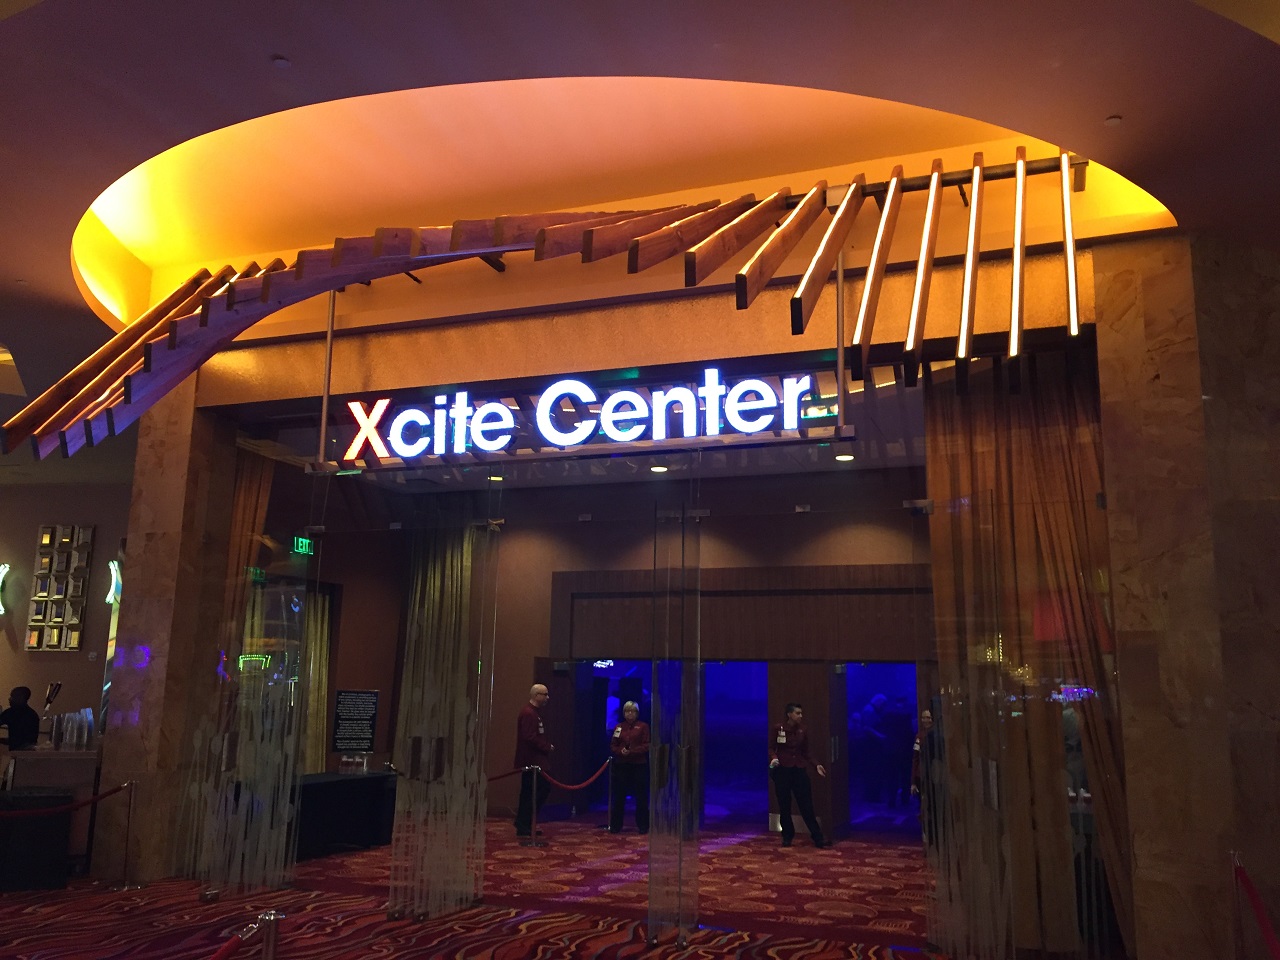 parx casino xcite center view from seat